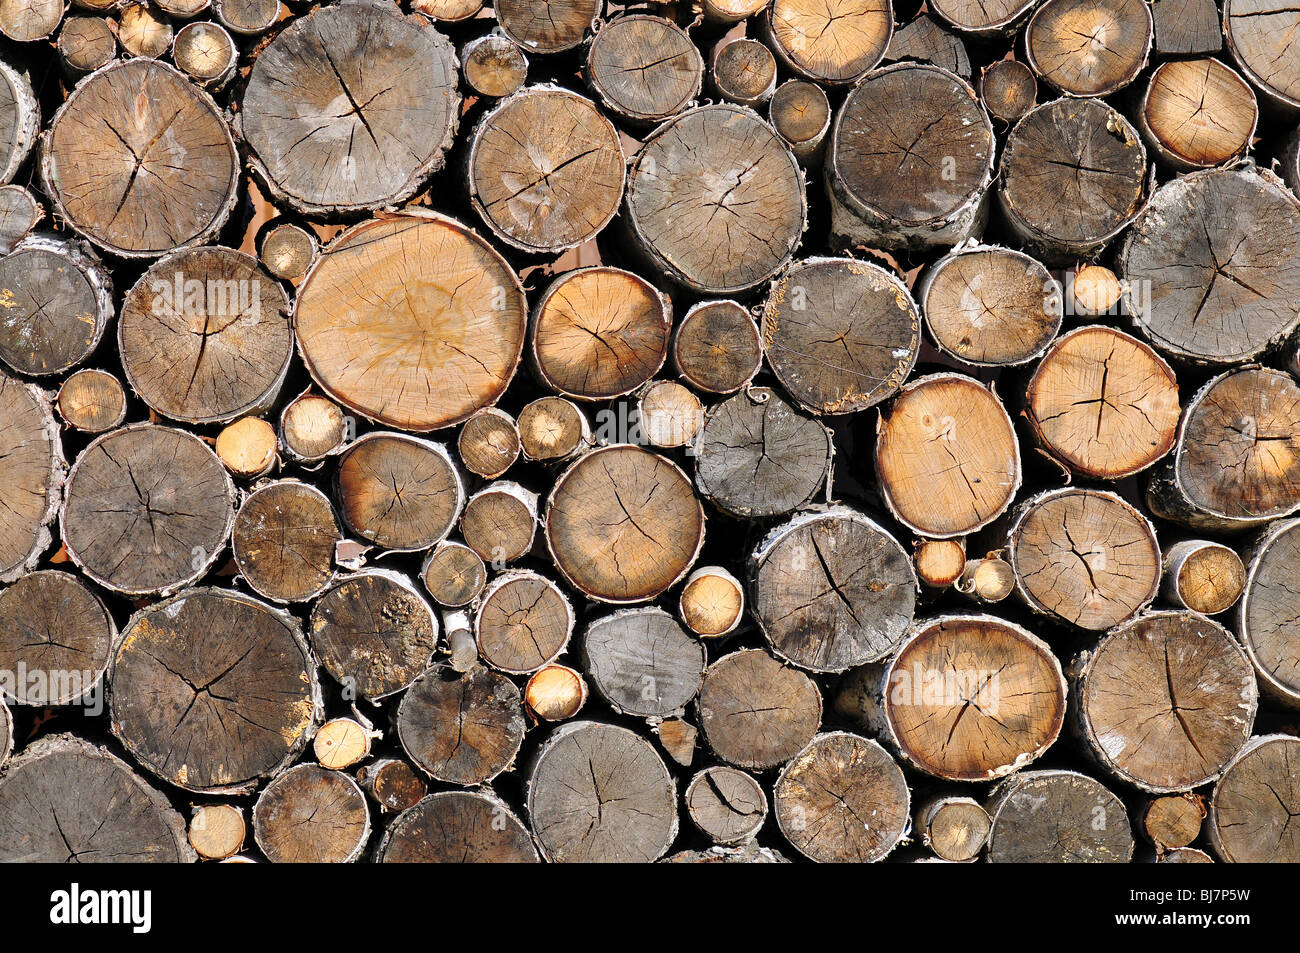 Firewoods stack of round logs for texture or background Stock Photo